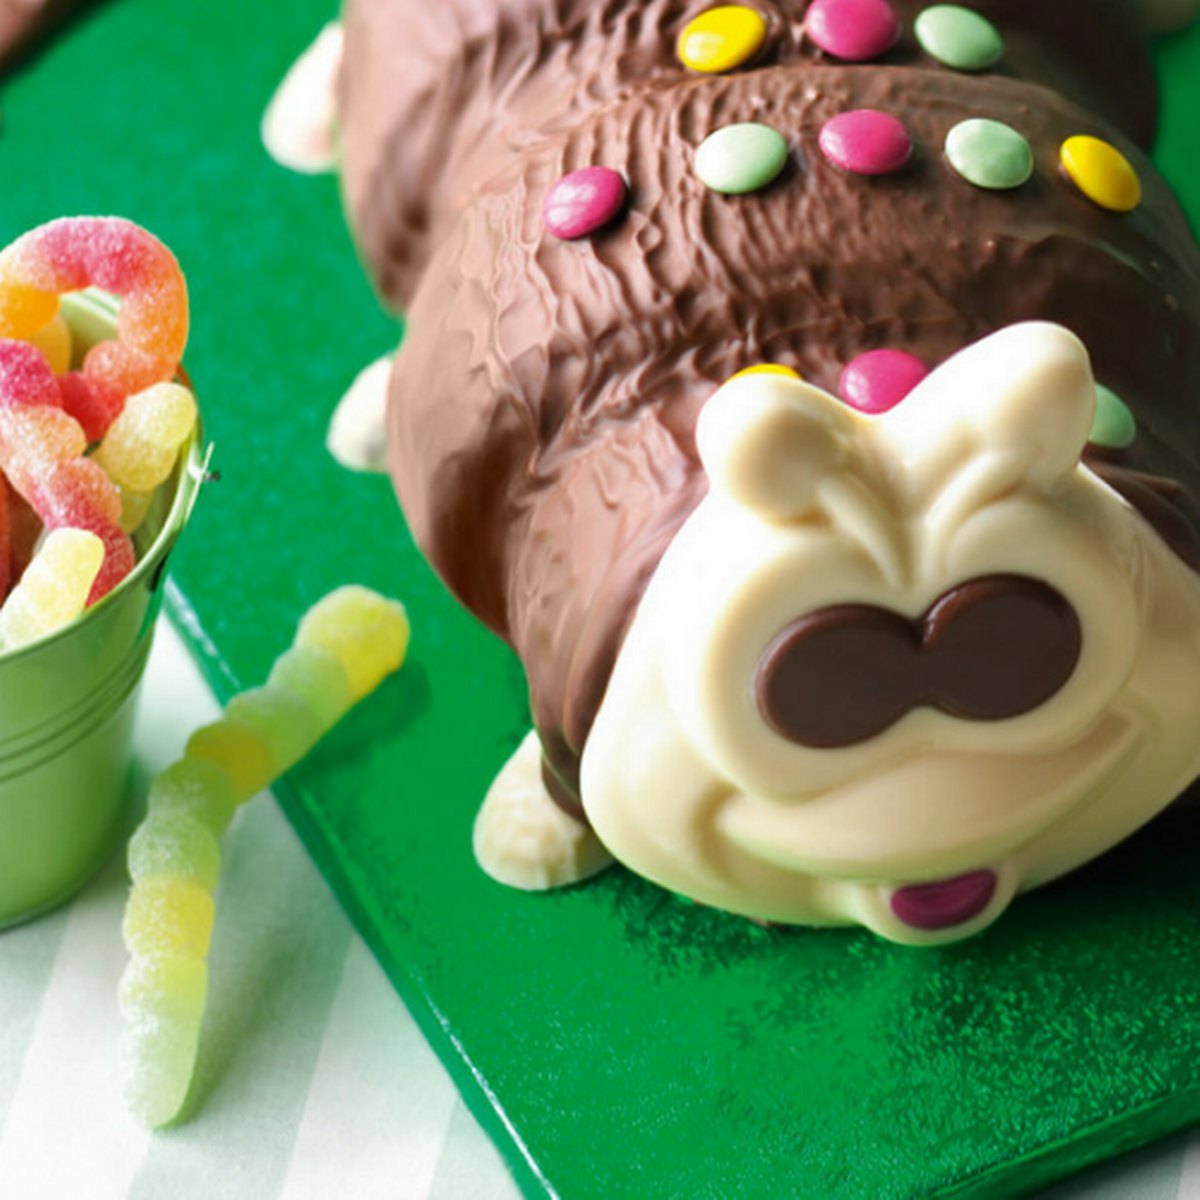 The Colin The Caterpillar Court Case, Explained